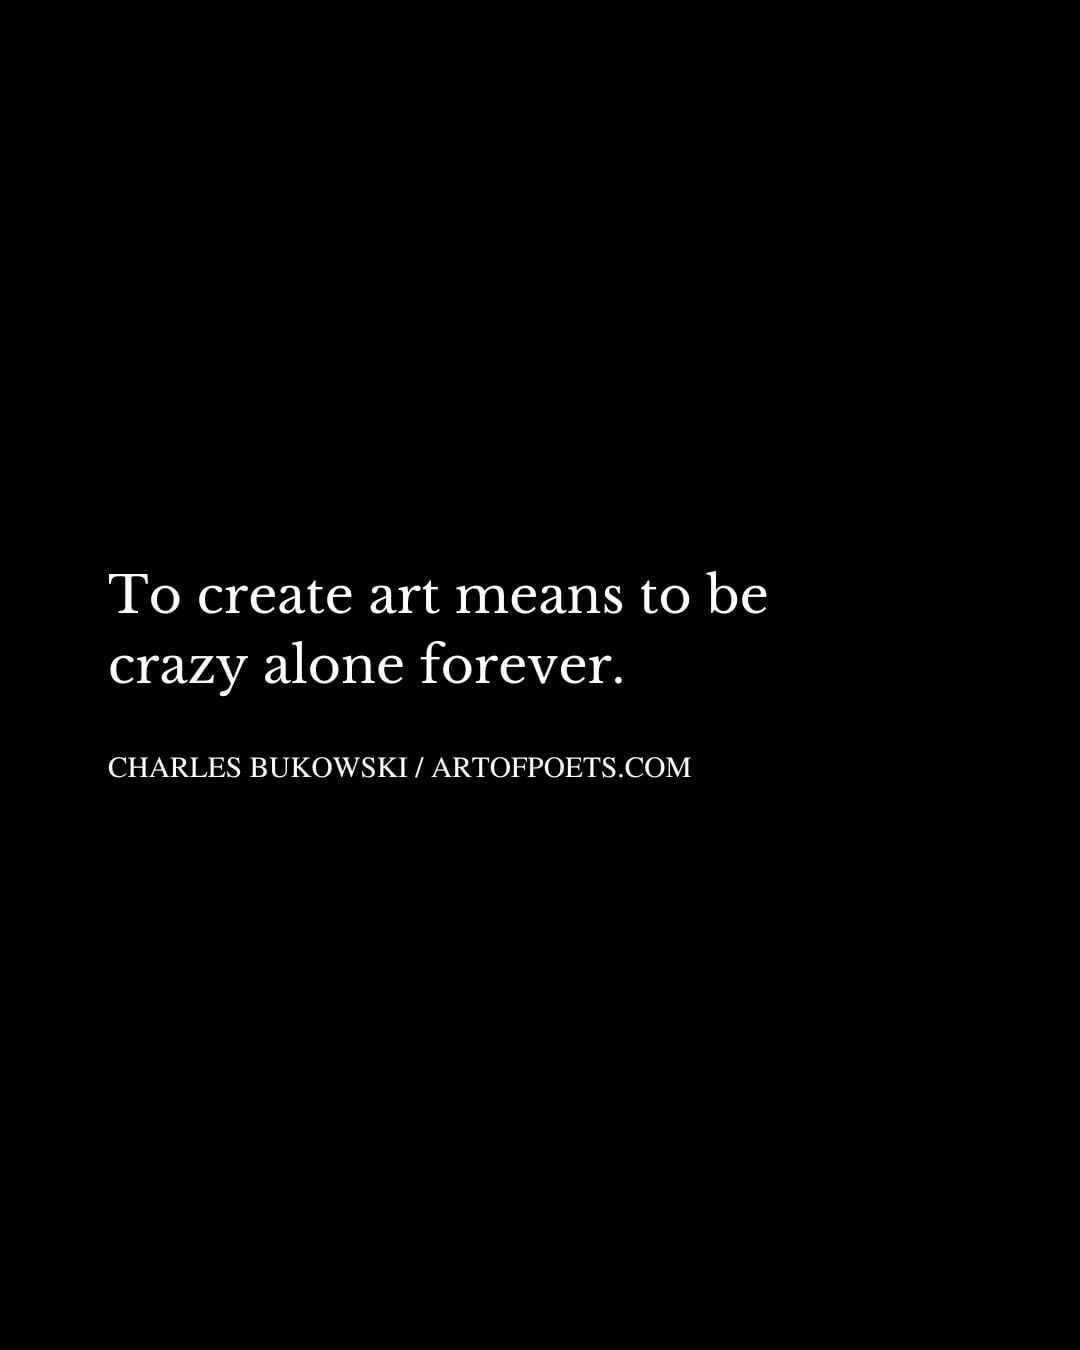 To create art means to be crazy alone forever